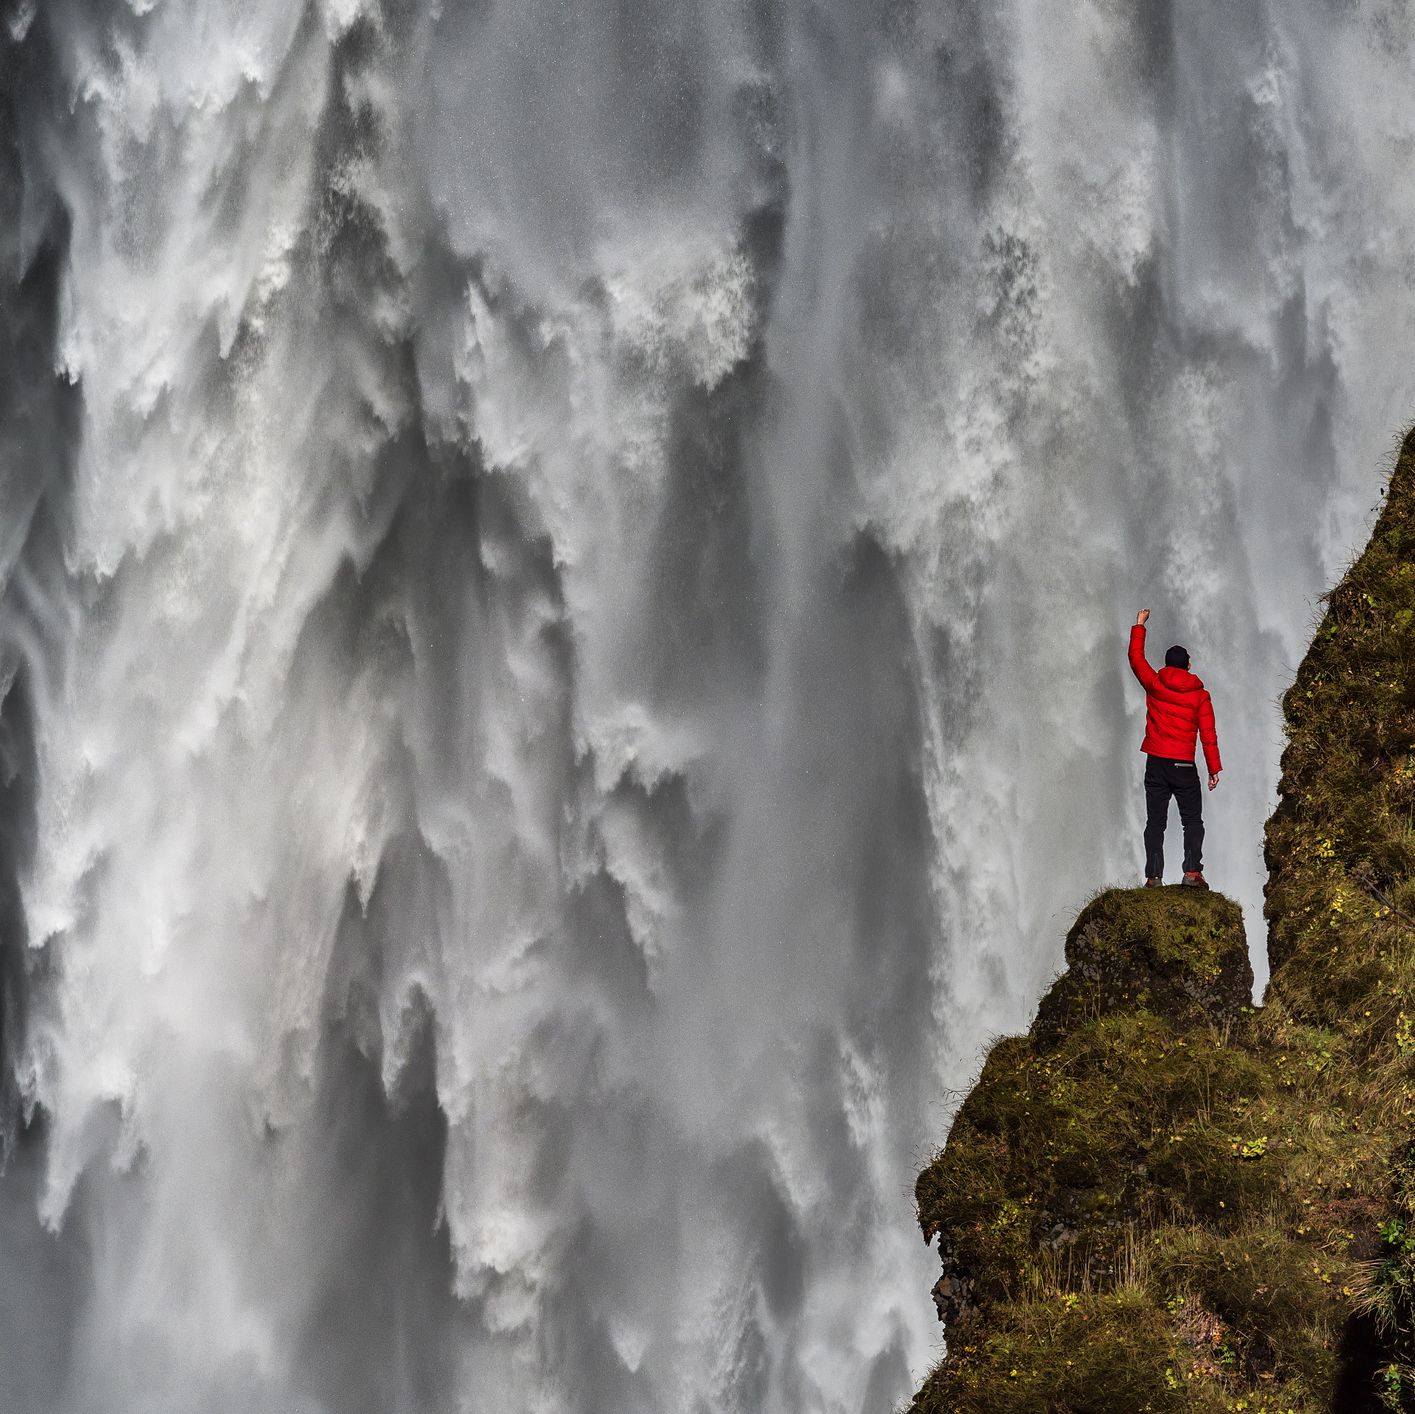 How To Survive a Waterfall Plunge Using Science